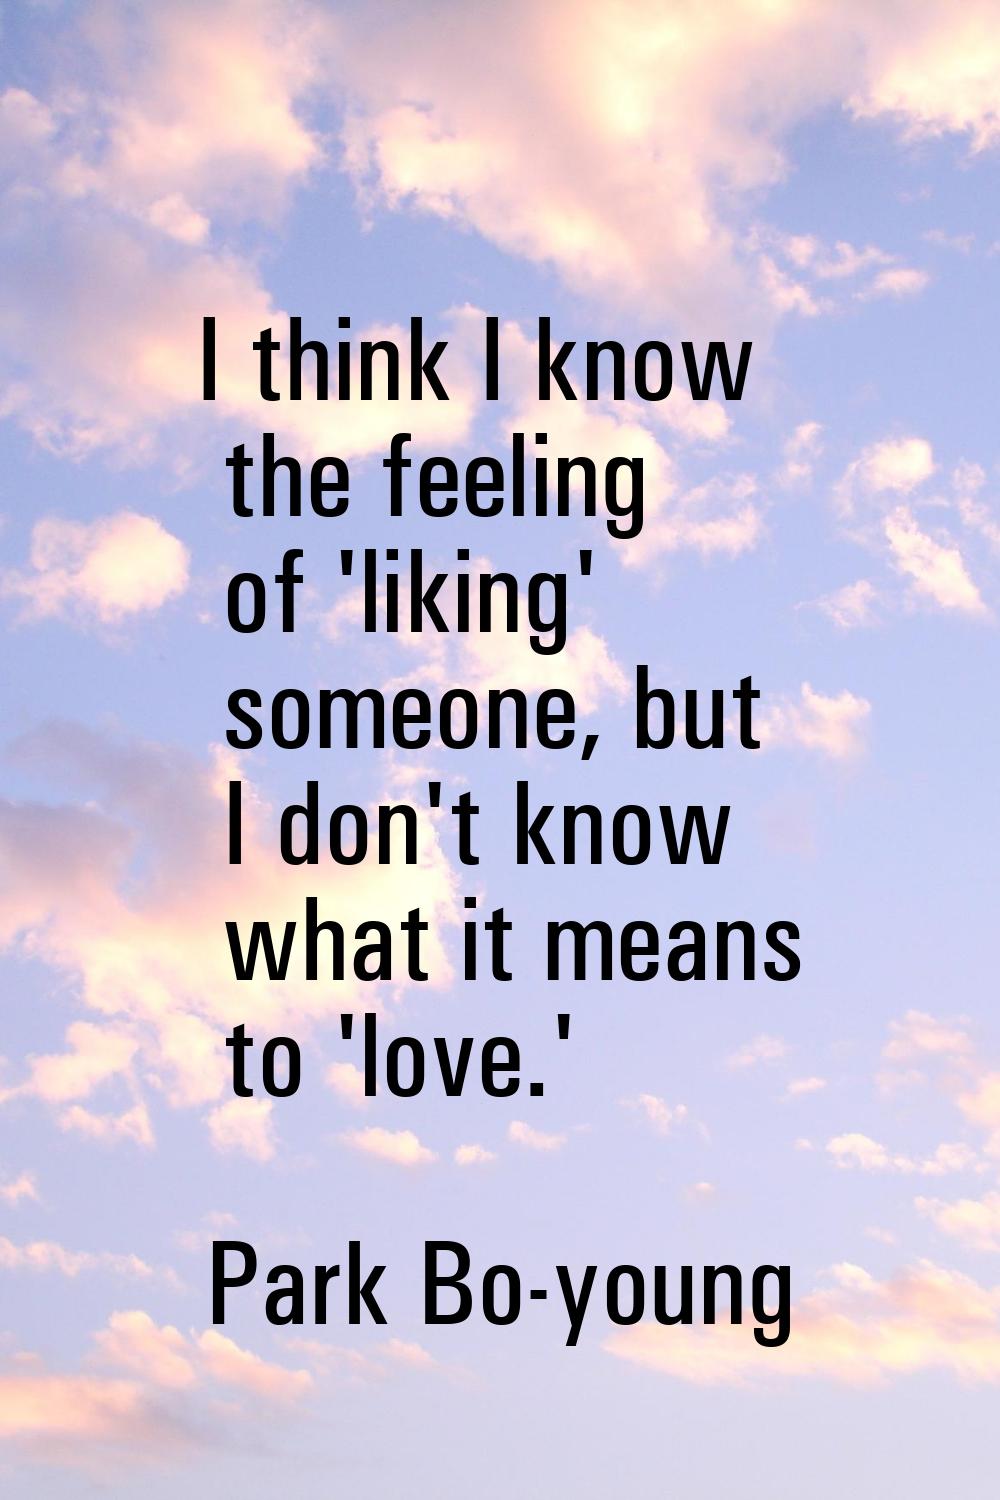 I think I know the feeling of 'liking' someone, but I don't know what it means to 'love.'